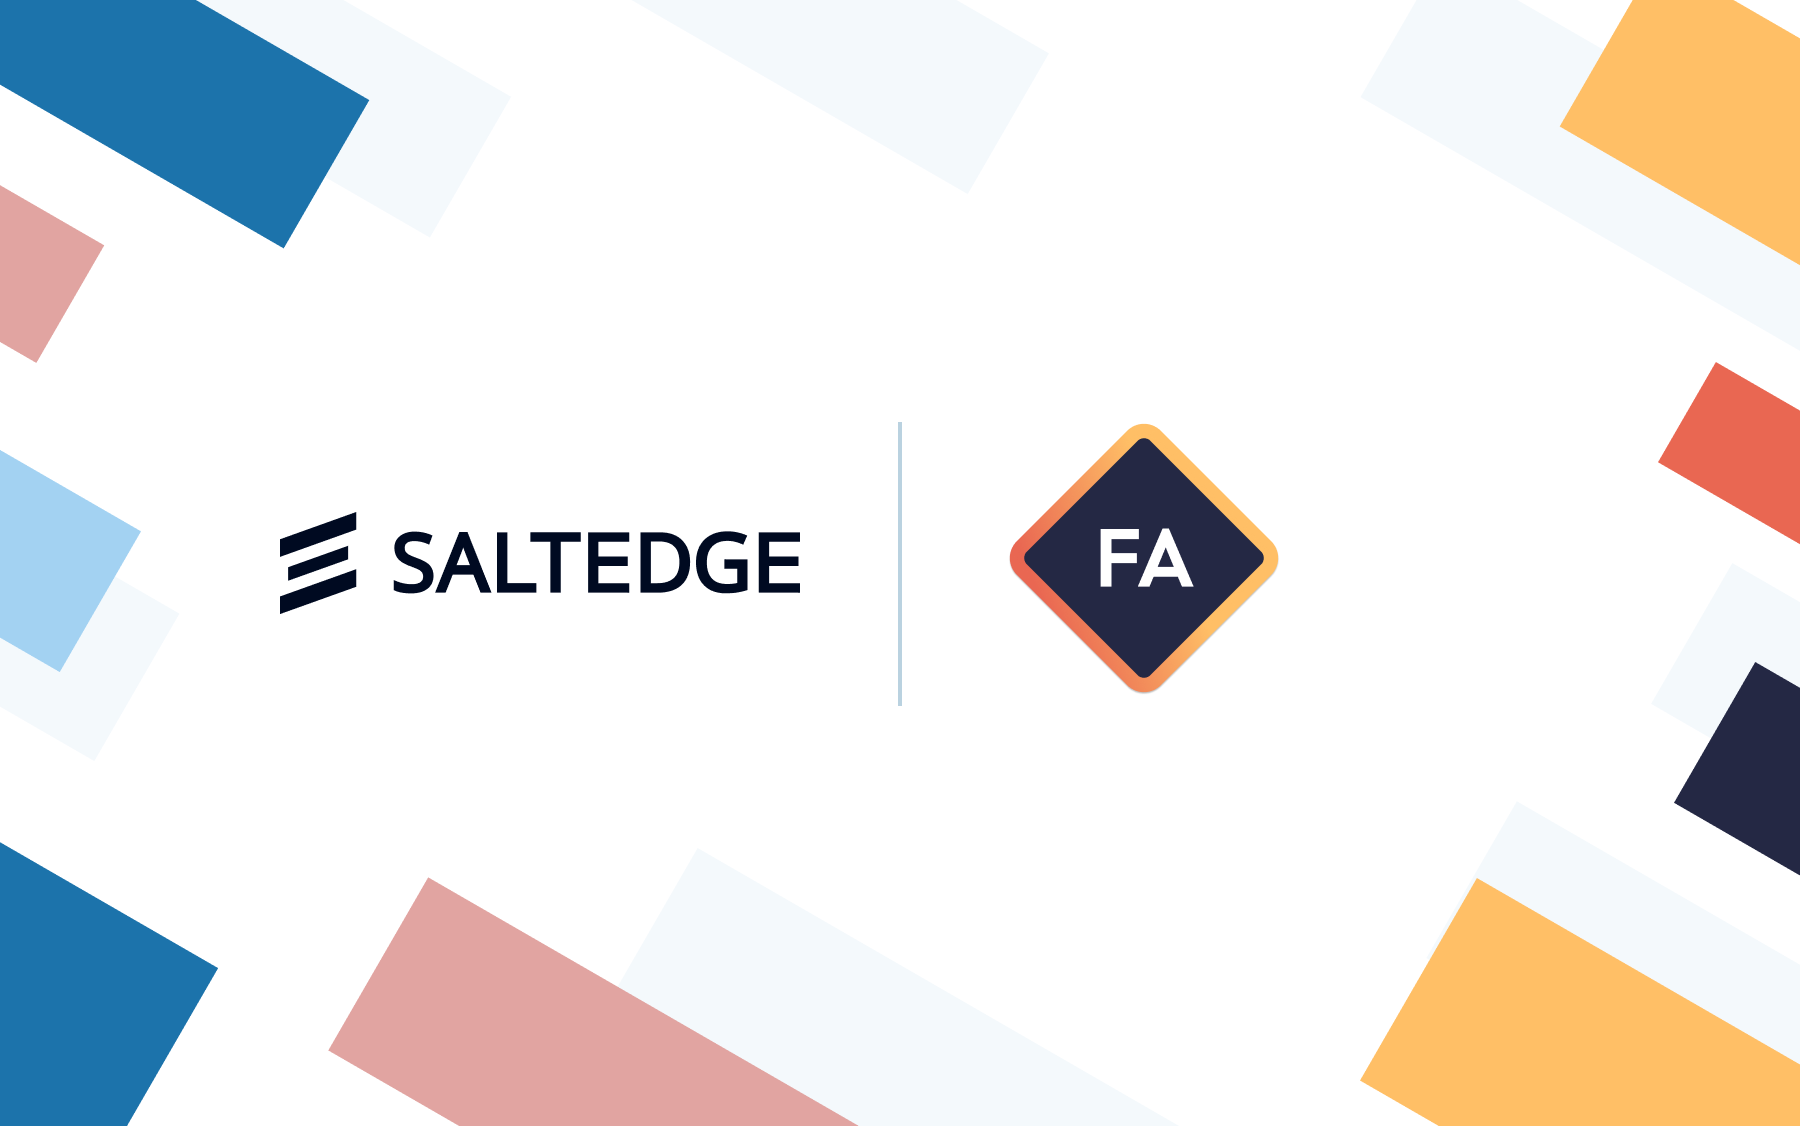 Forward Advances Chooses Salt Edge to Verify Business Performance of Their Customers Instantly